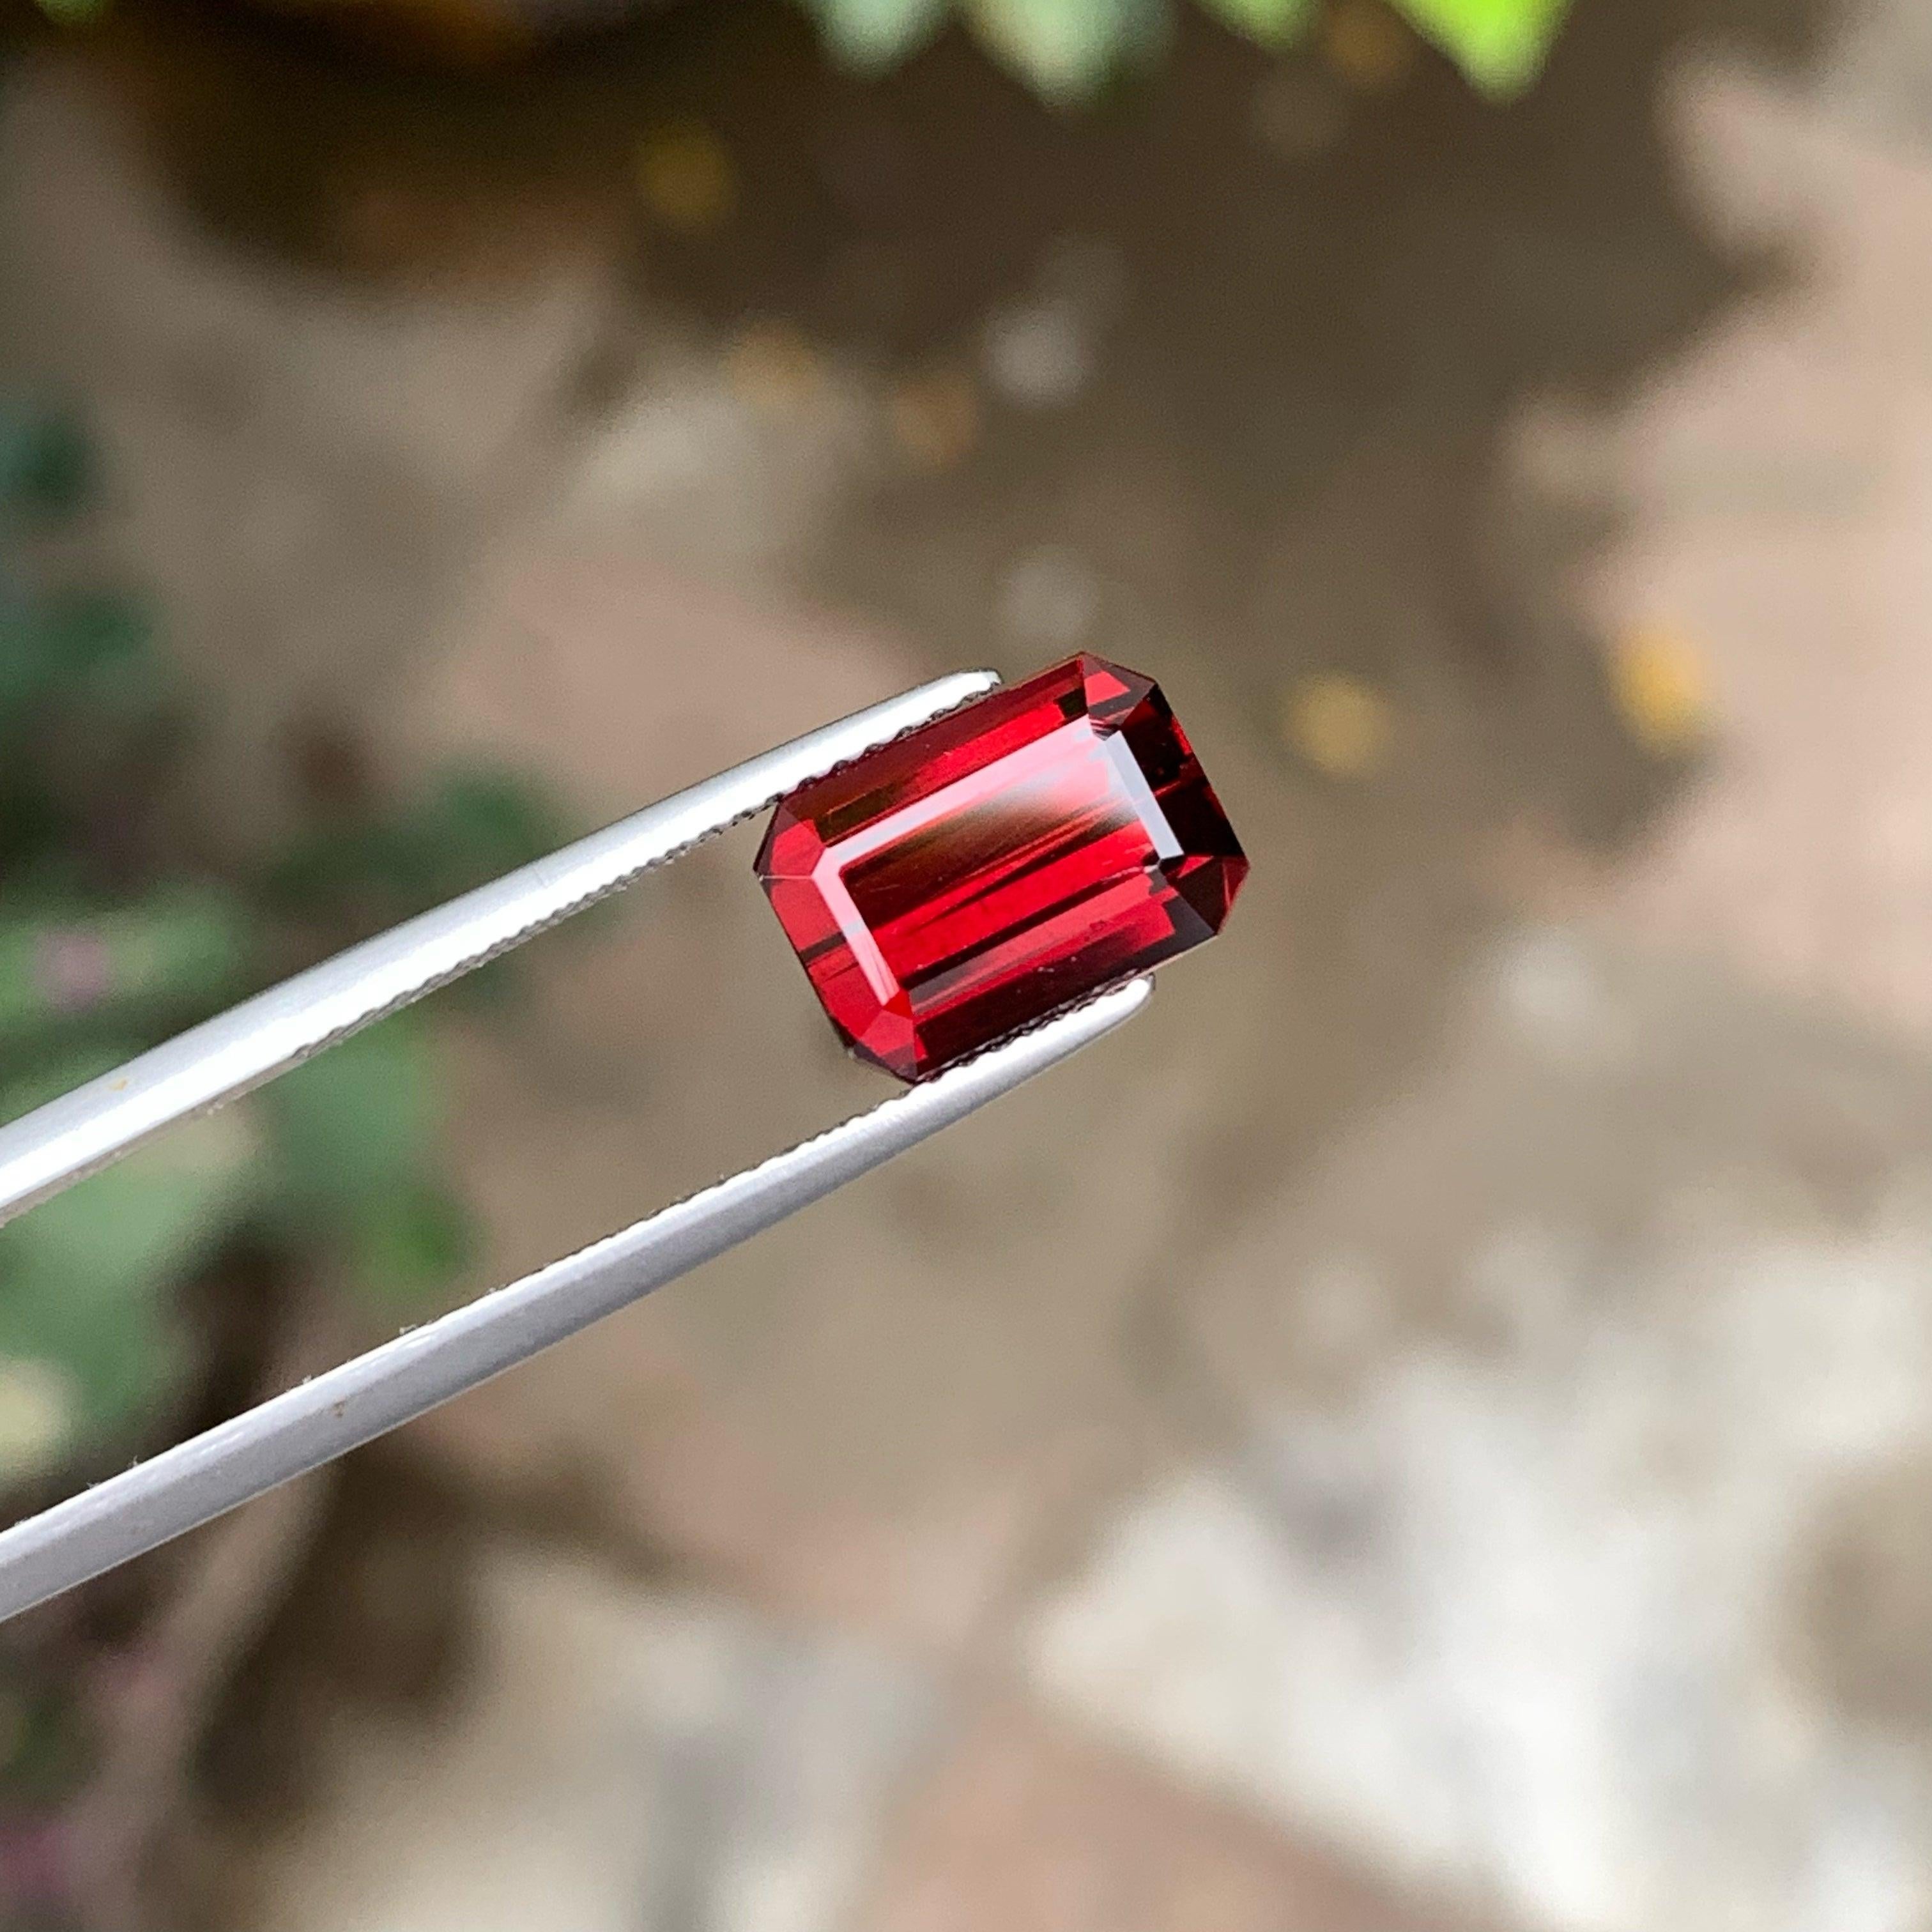 Bright Red Garnet Loose Gemstone, Available for sale at whole sale price natural high quality 4.95 carats Eye Clean Clarity Loose Garnet from Africa.

Product Information:
GEMSTONE NAME: Bright Red Garnet Loose Gemstone
WEIGHT: 4.95